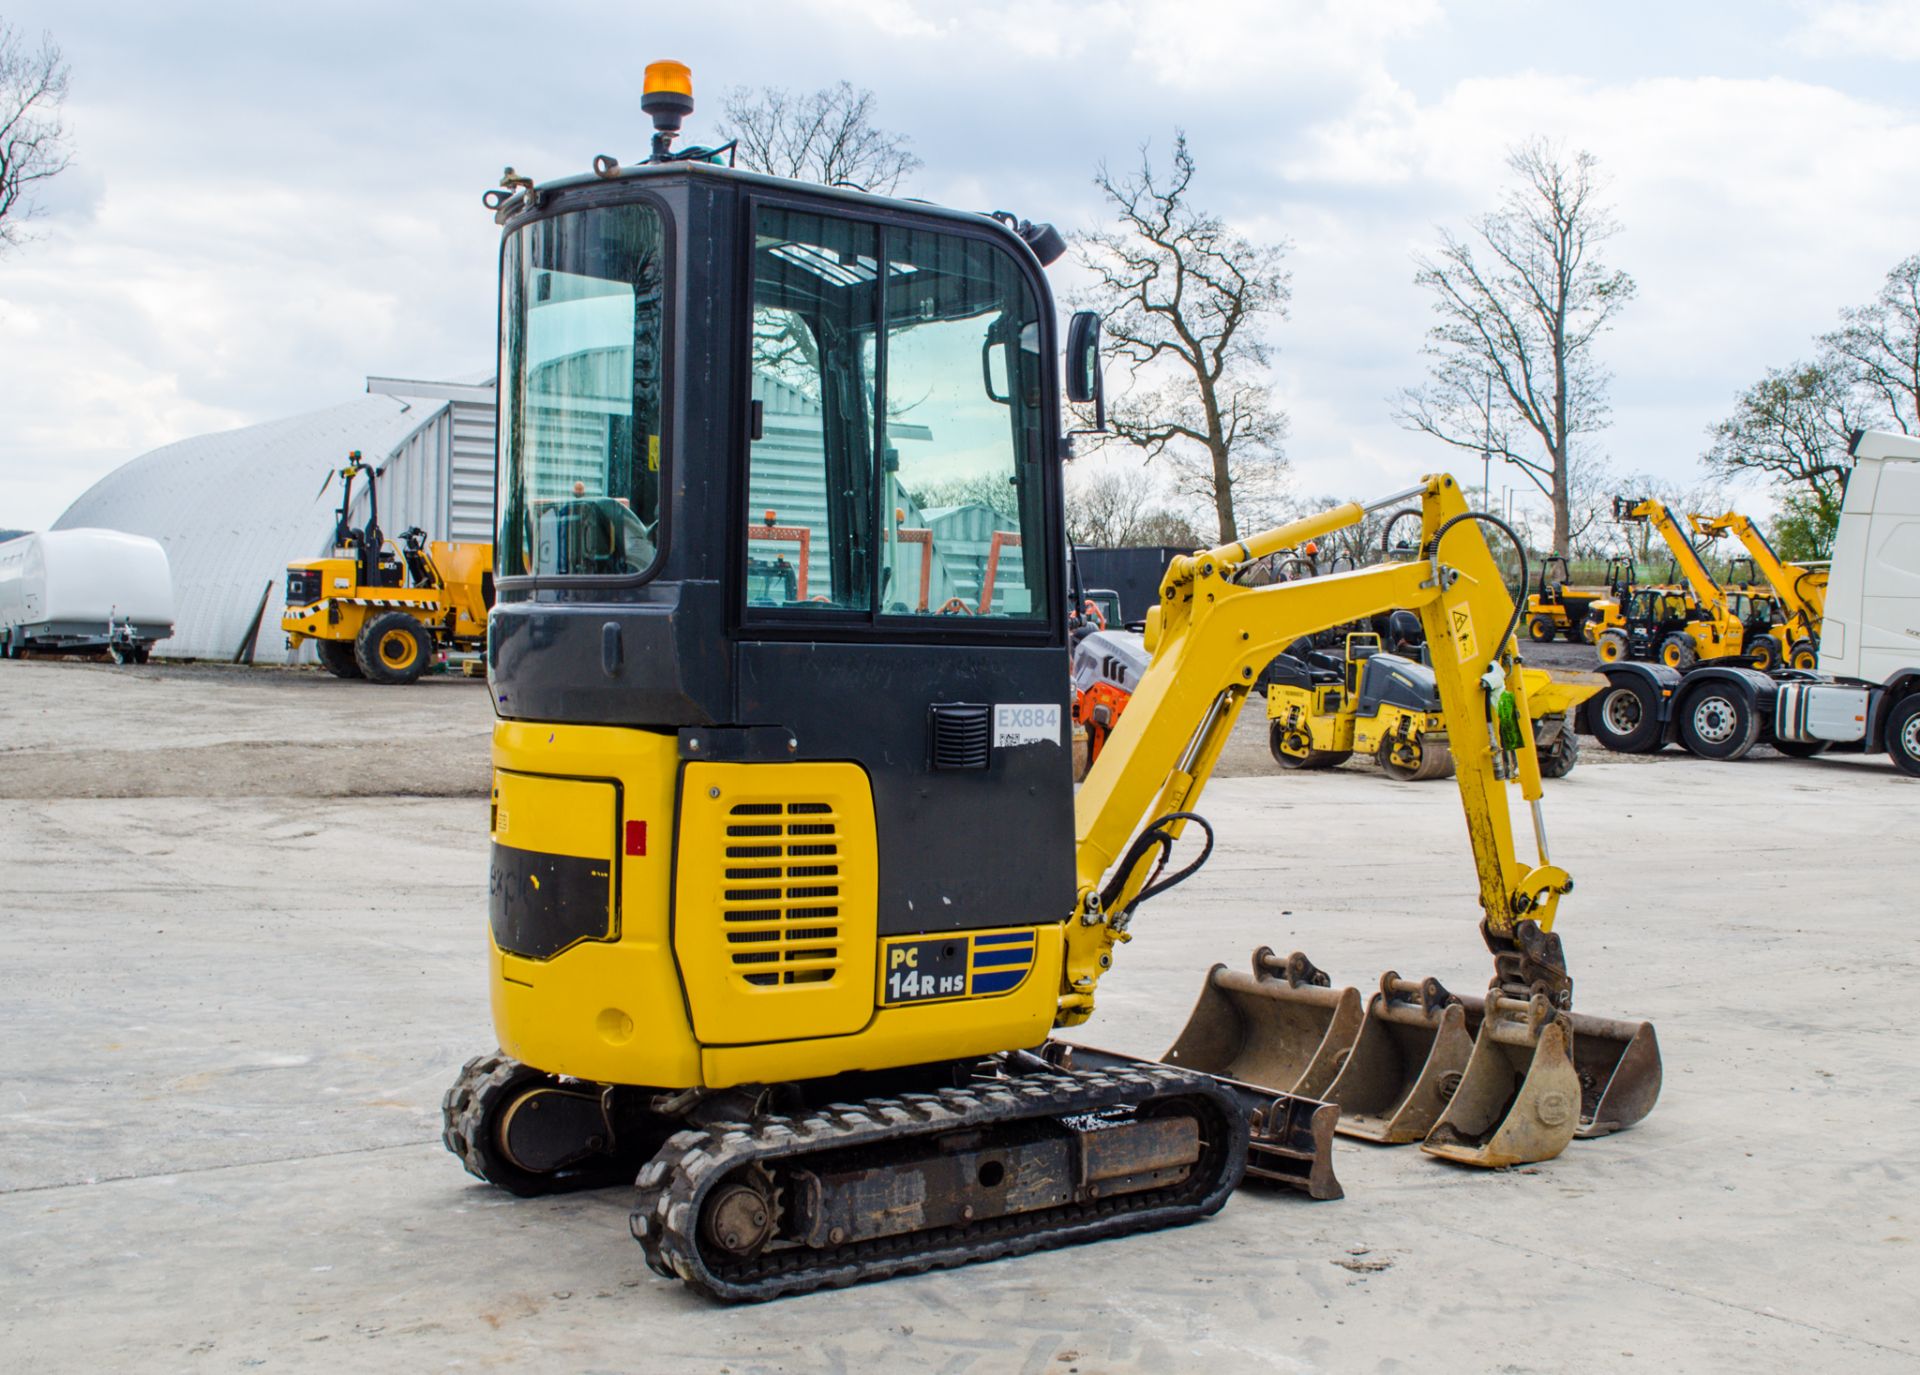 Komatsu  PC 14-R-3HS  1.7 tonne rubber tracked mini excavator Year: 2019  S/N: F50699 Recorded - Image 3 of 24